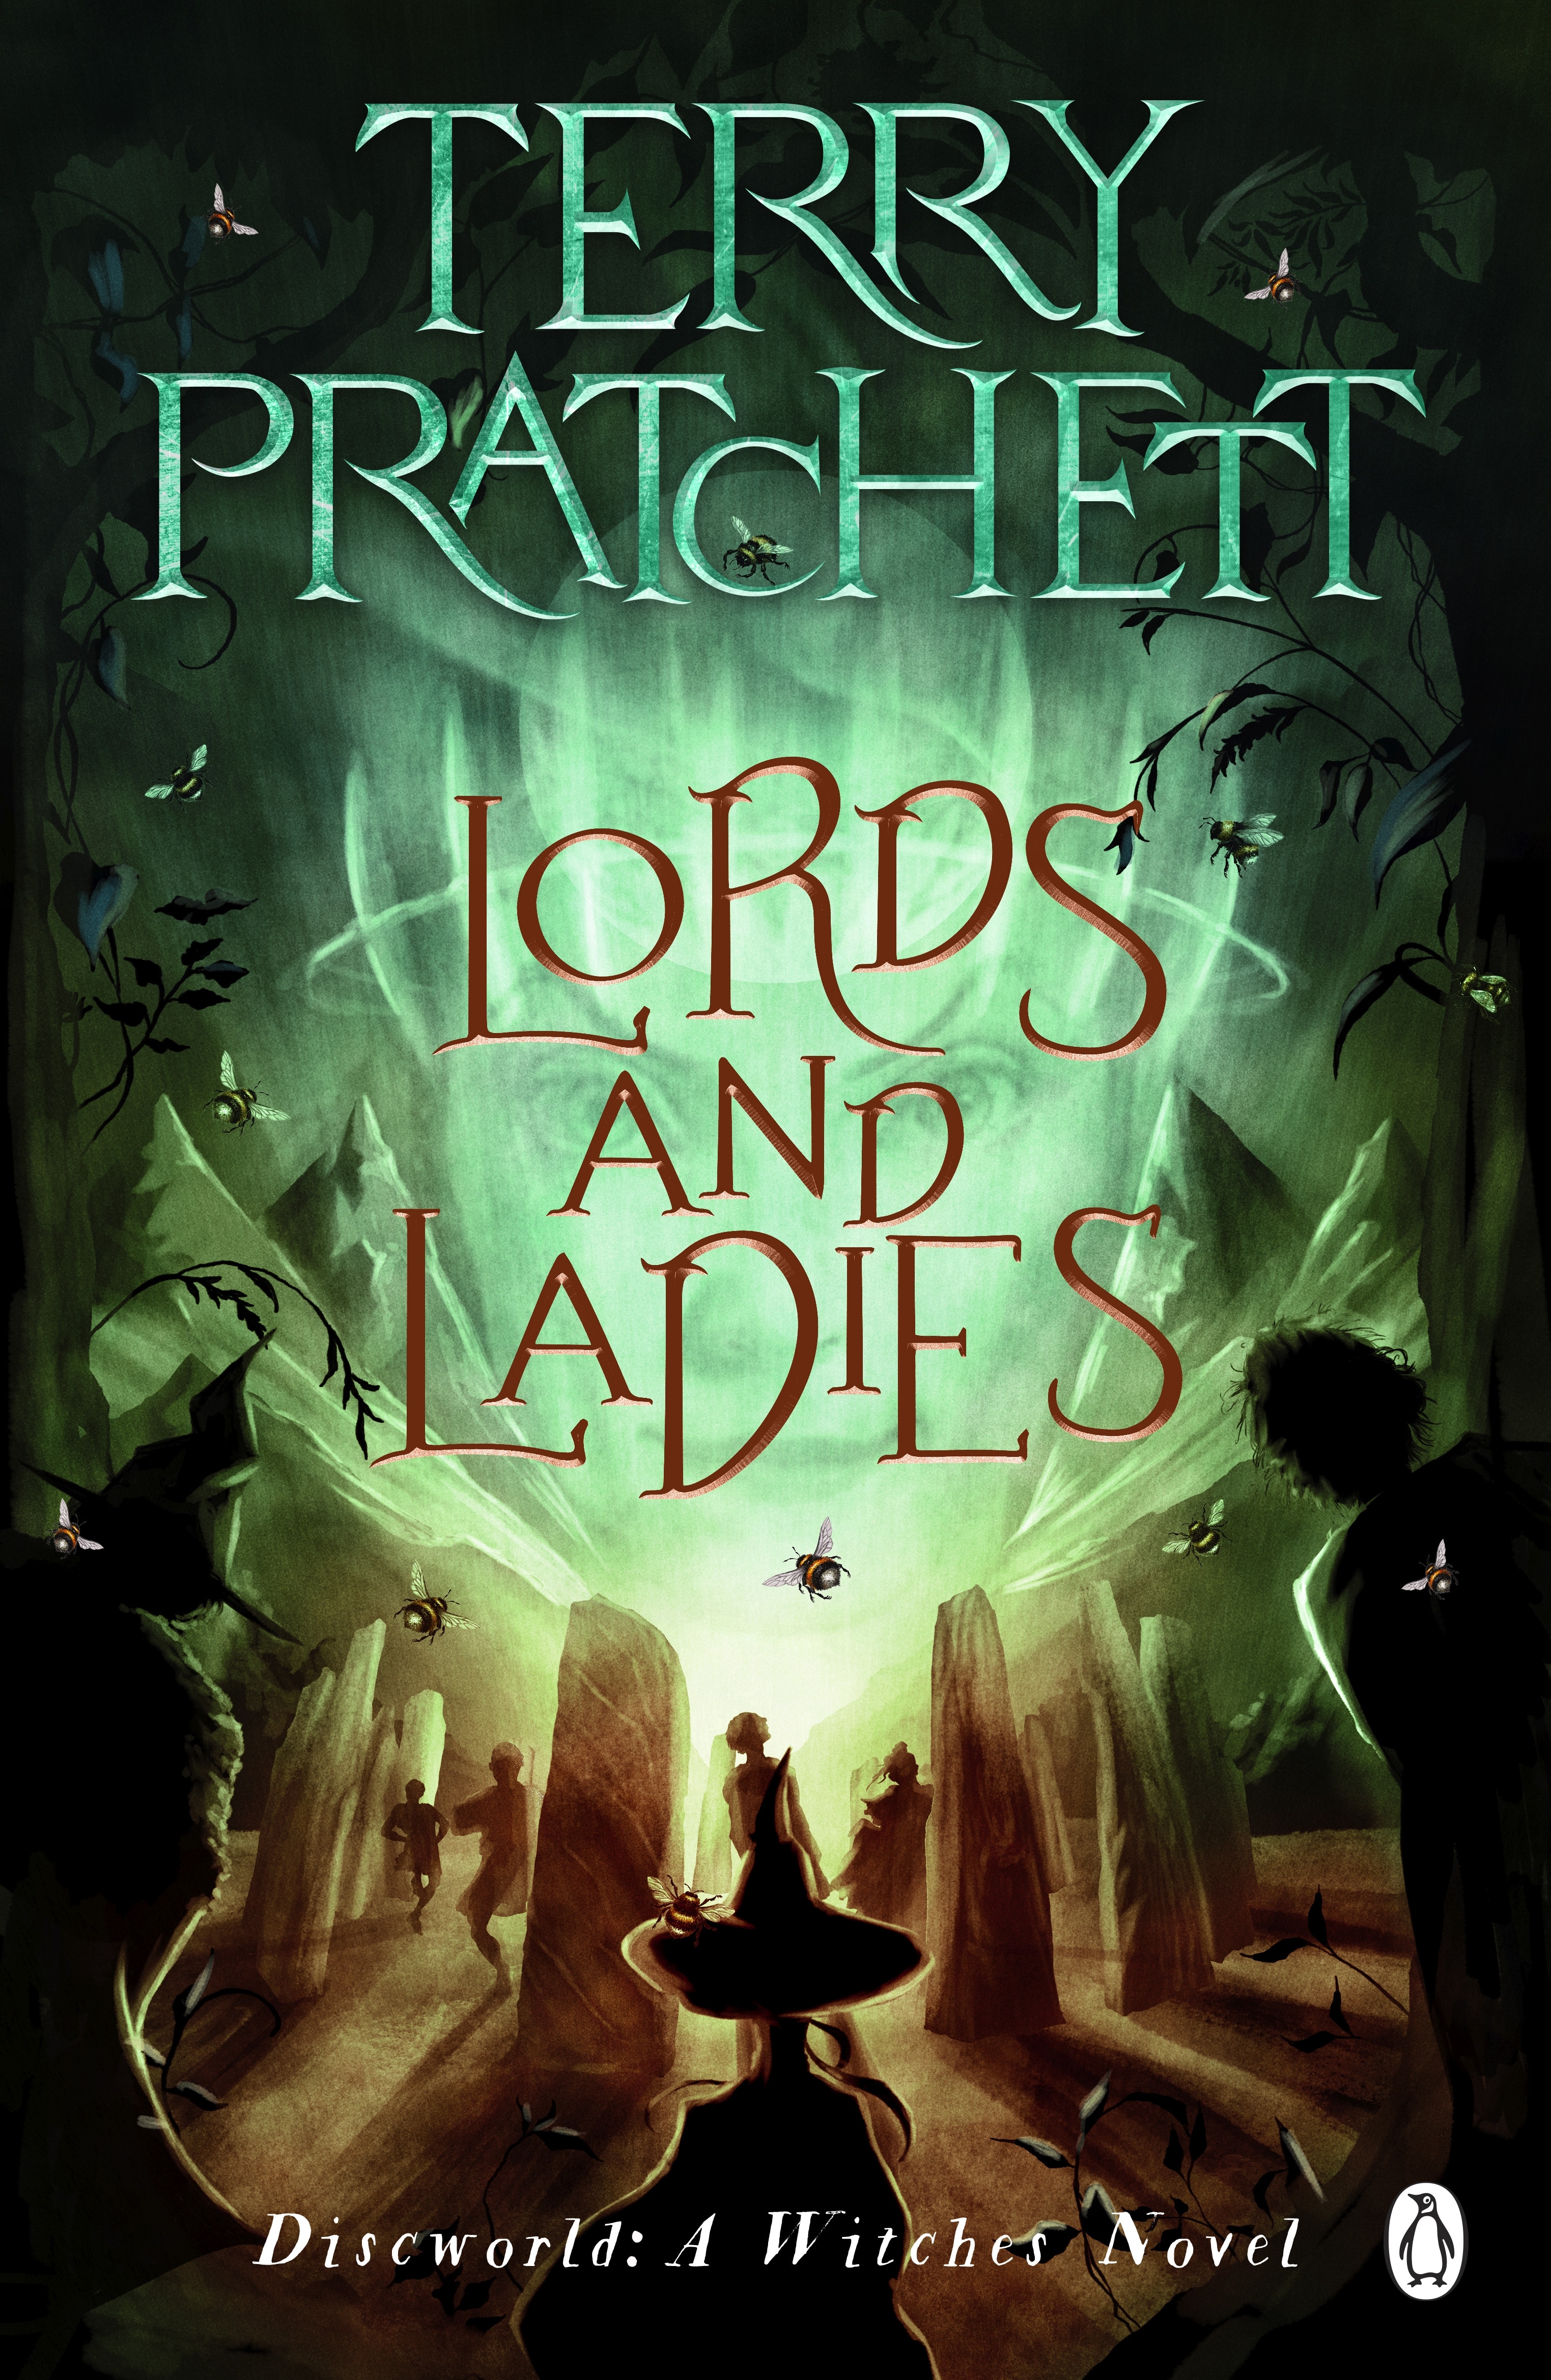 Book “Lords And Ladies” by Terry Pratchett — April 28, 2022